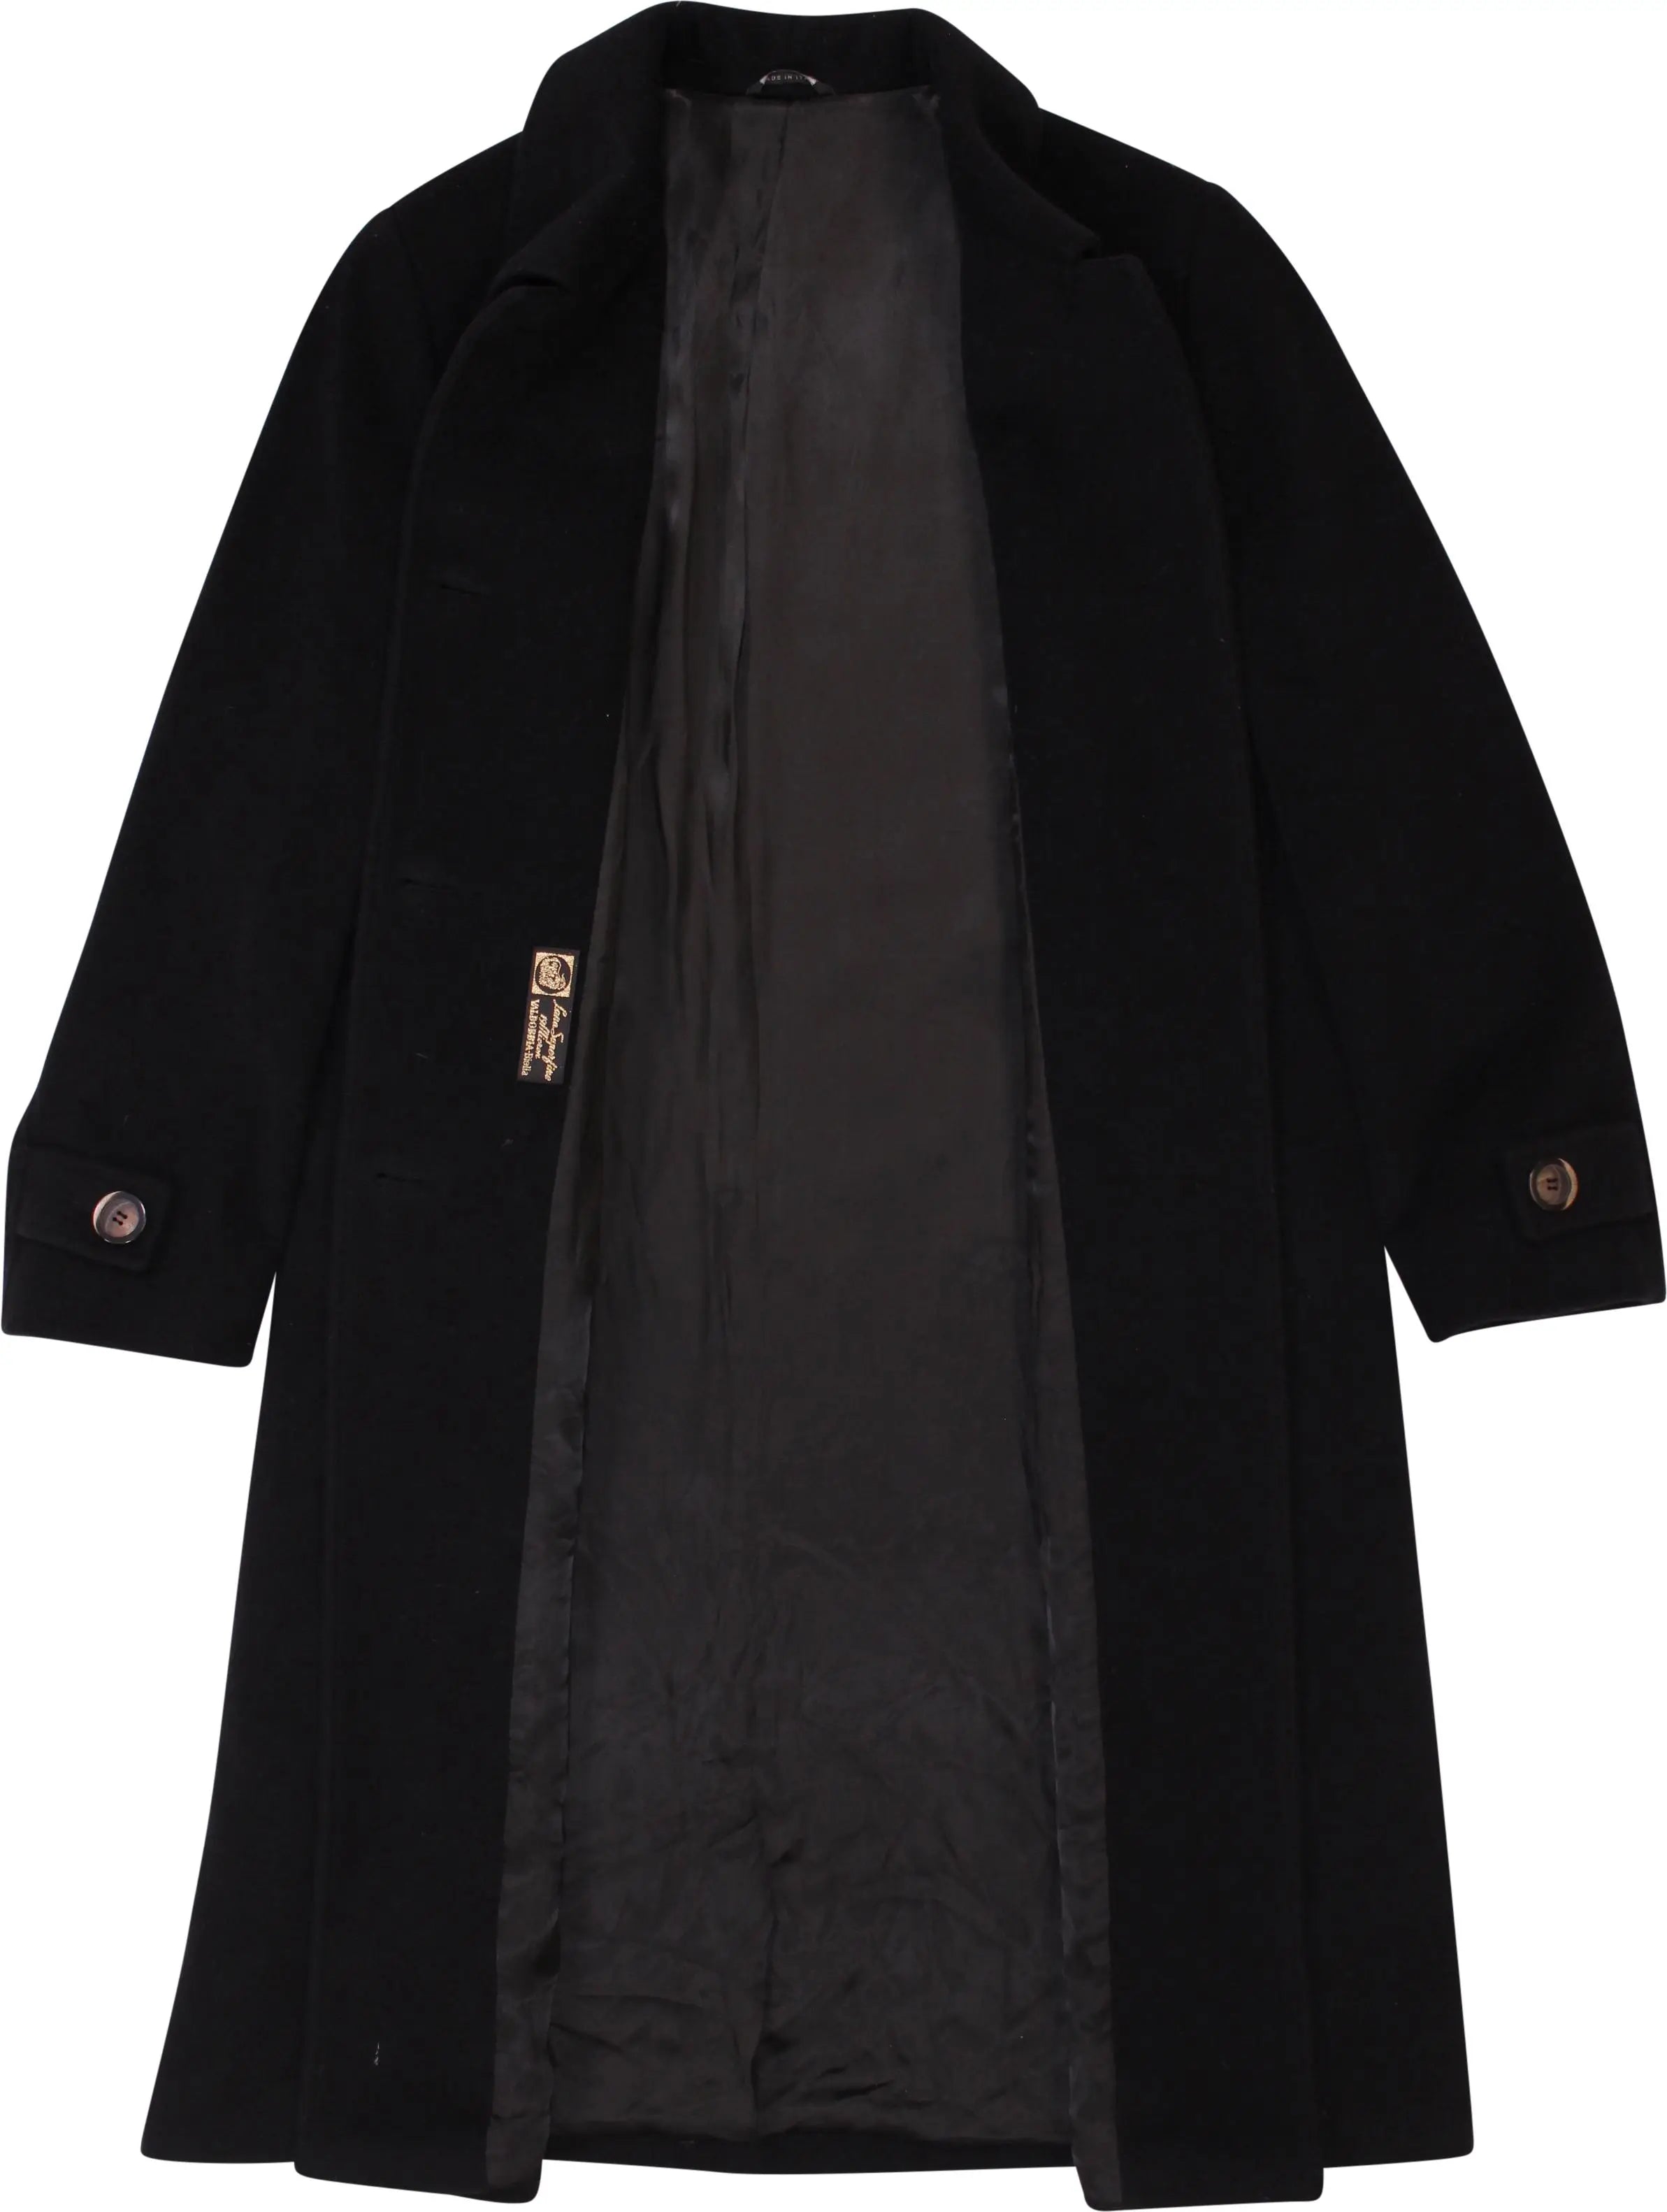 Unknown - Black Wool Coat- ThriftTale.com - Vintage and second handclothing